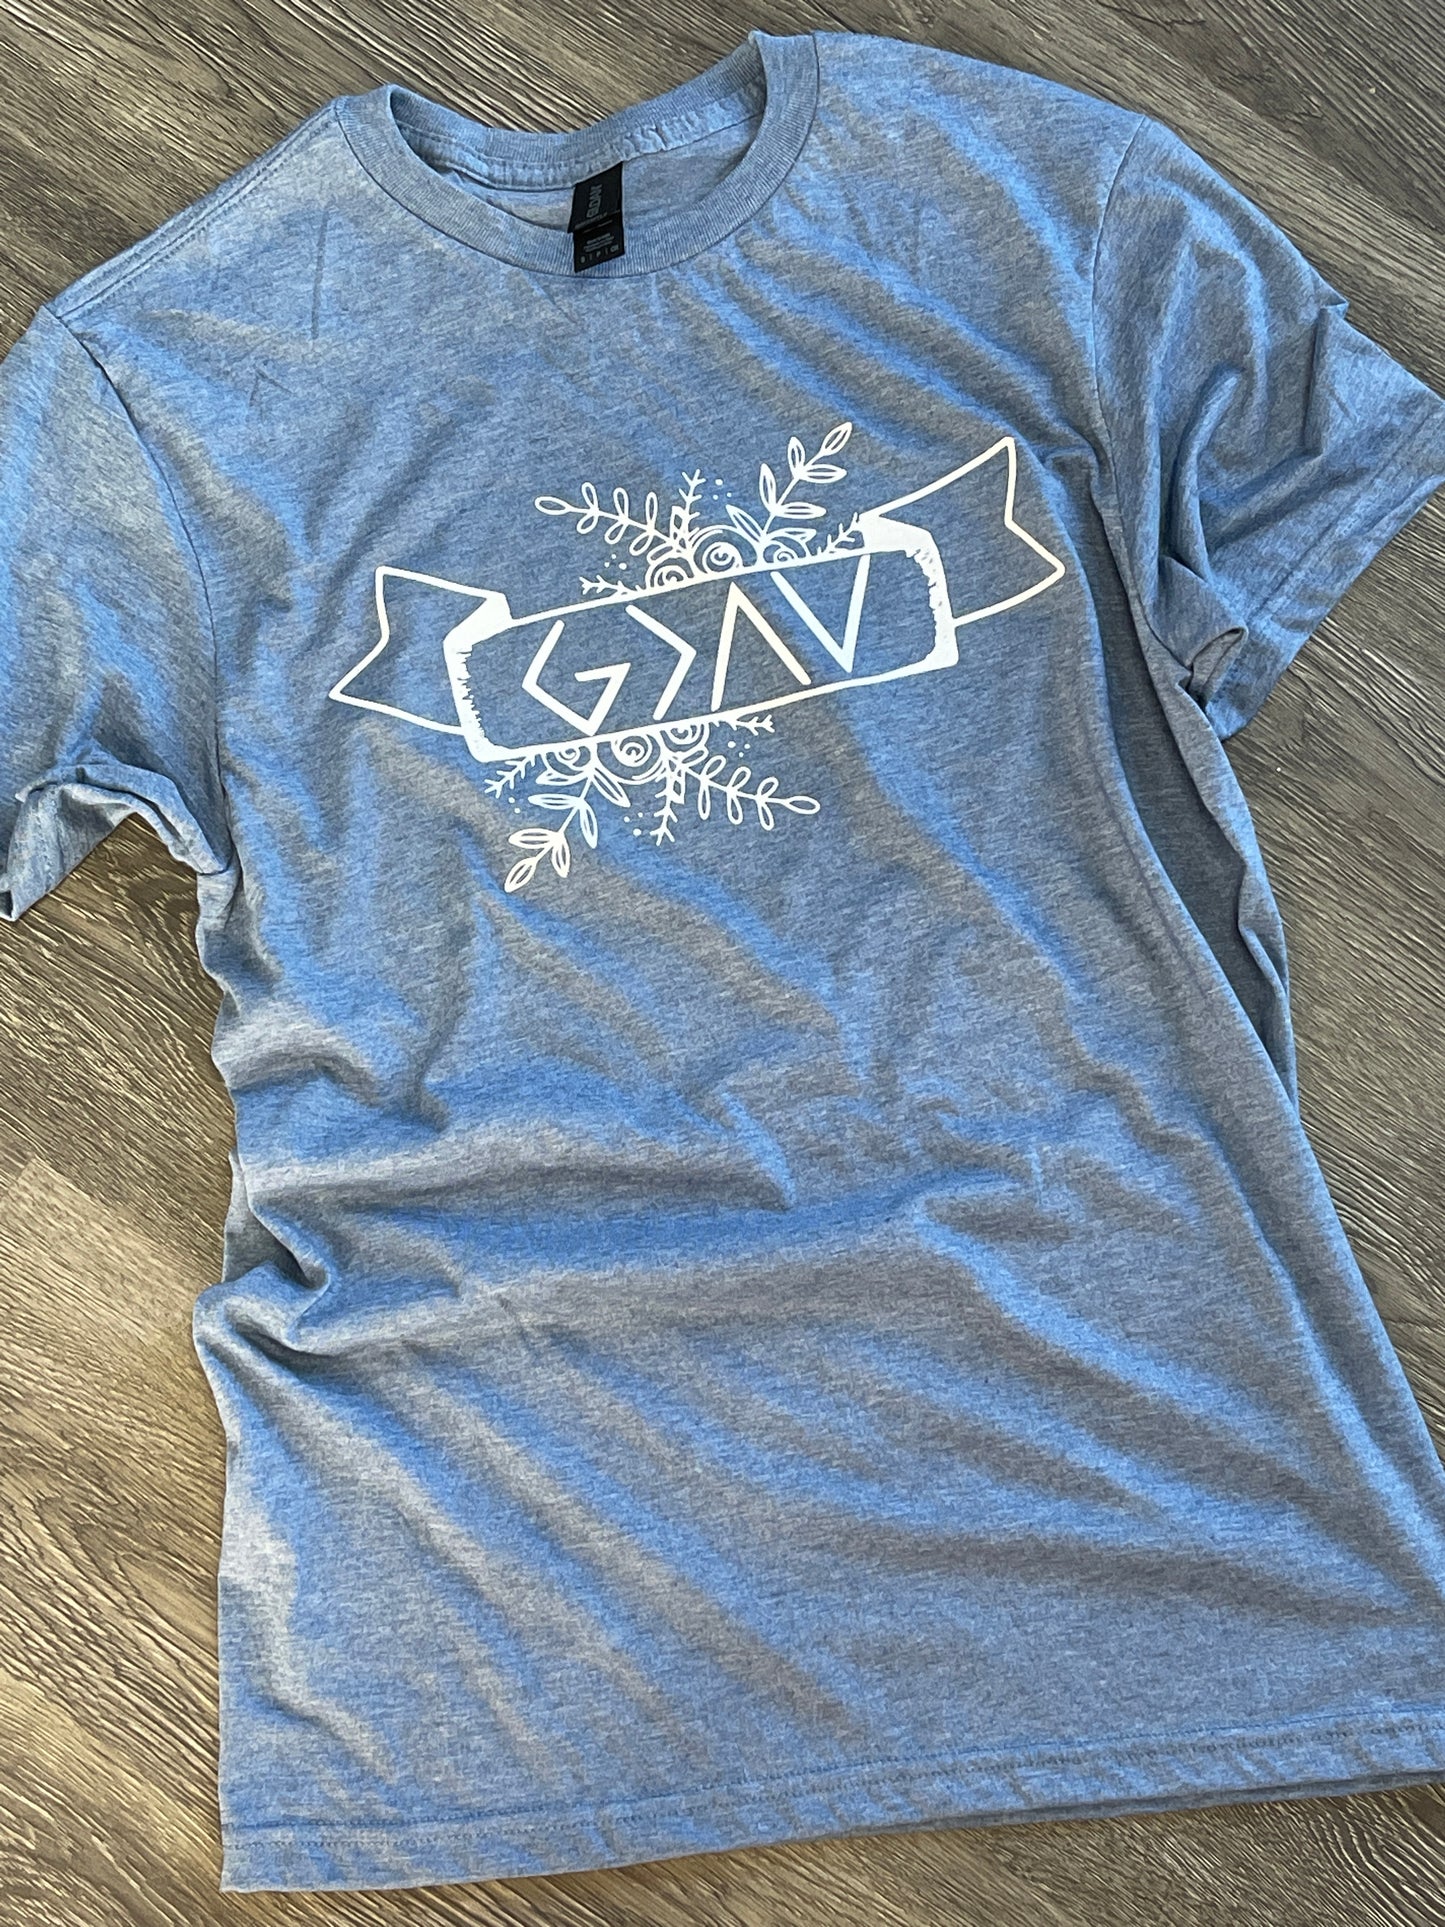 God Is Greater Graphic Tee